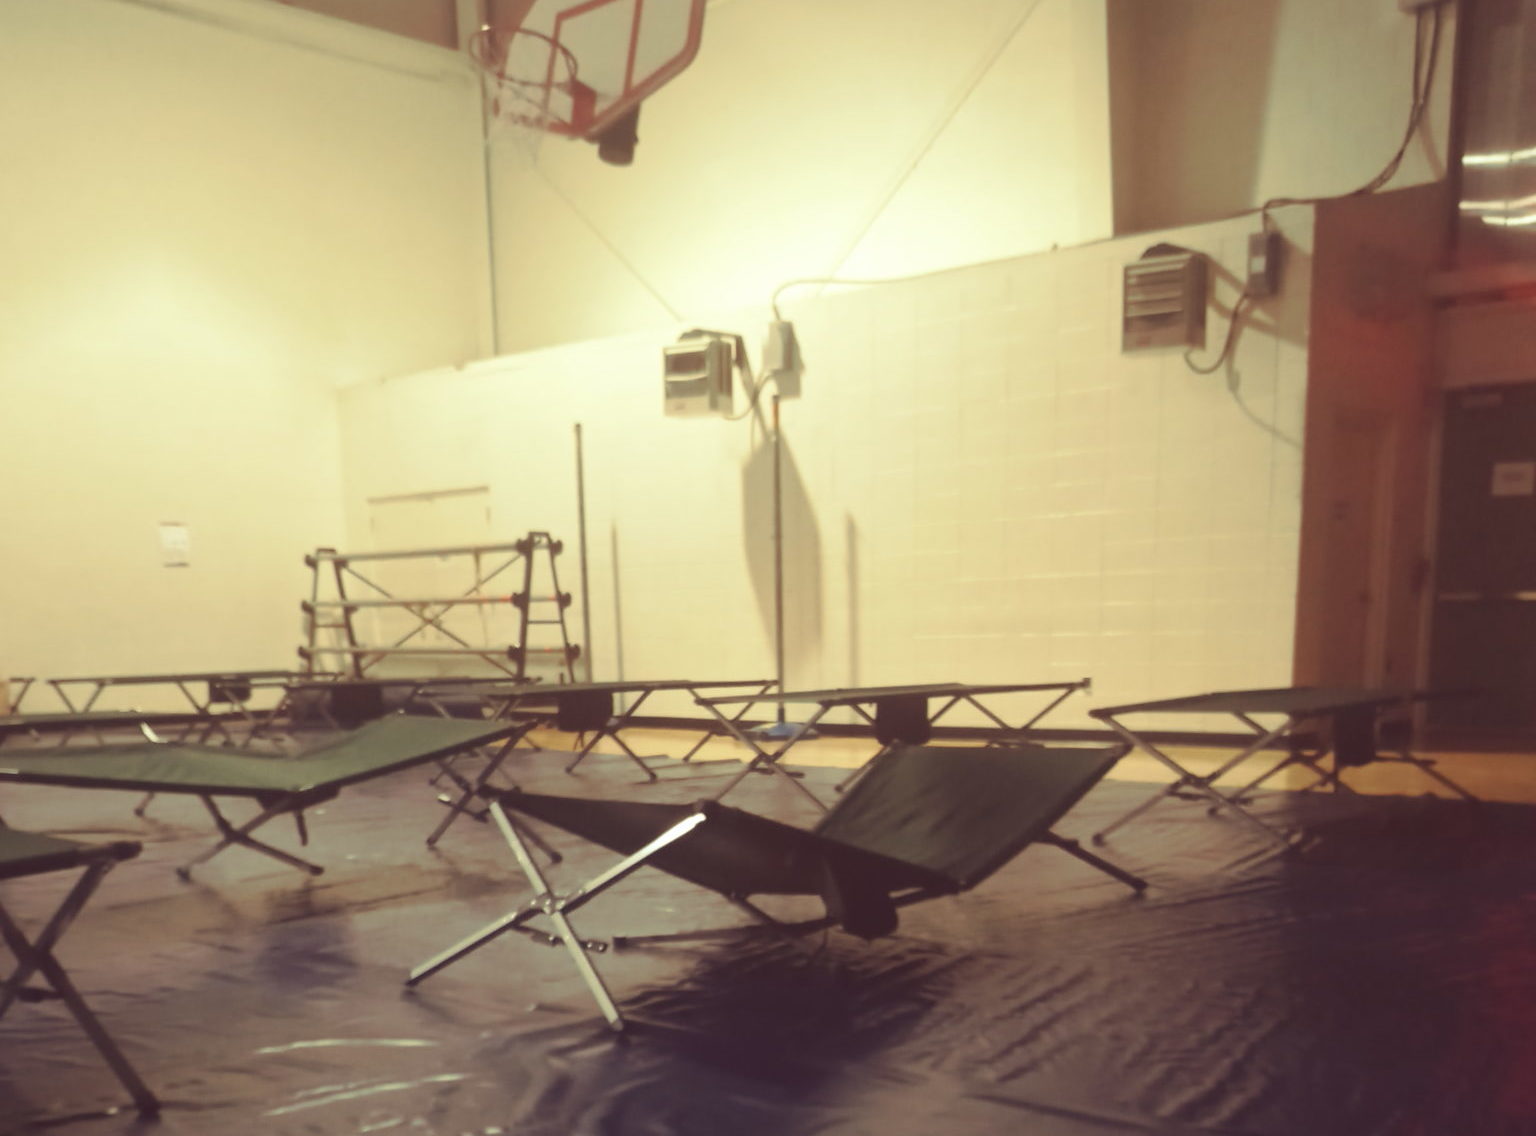 Photo of six empty cots in the gym, where plastic has been put down across the gym floor. A basketball goal is visible above.